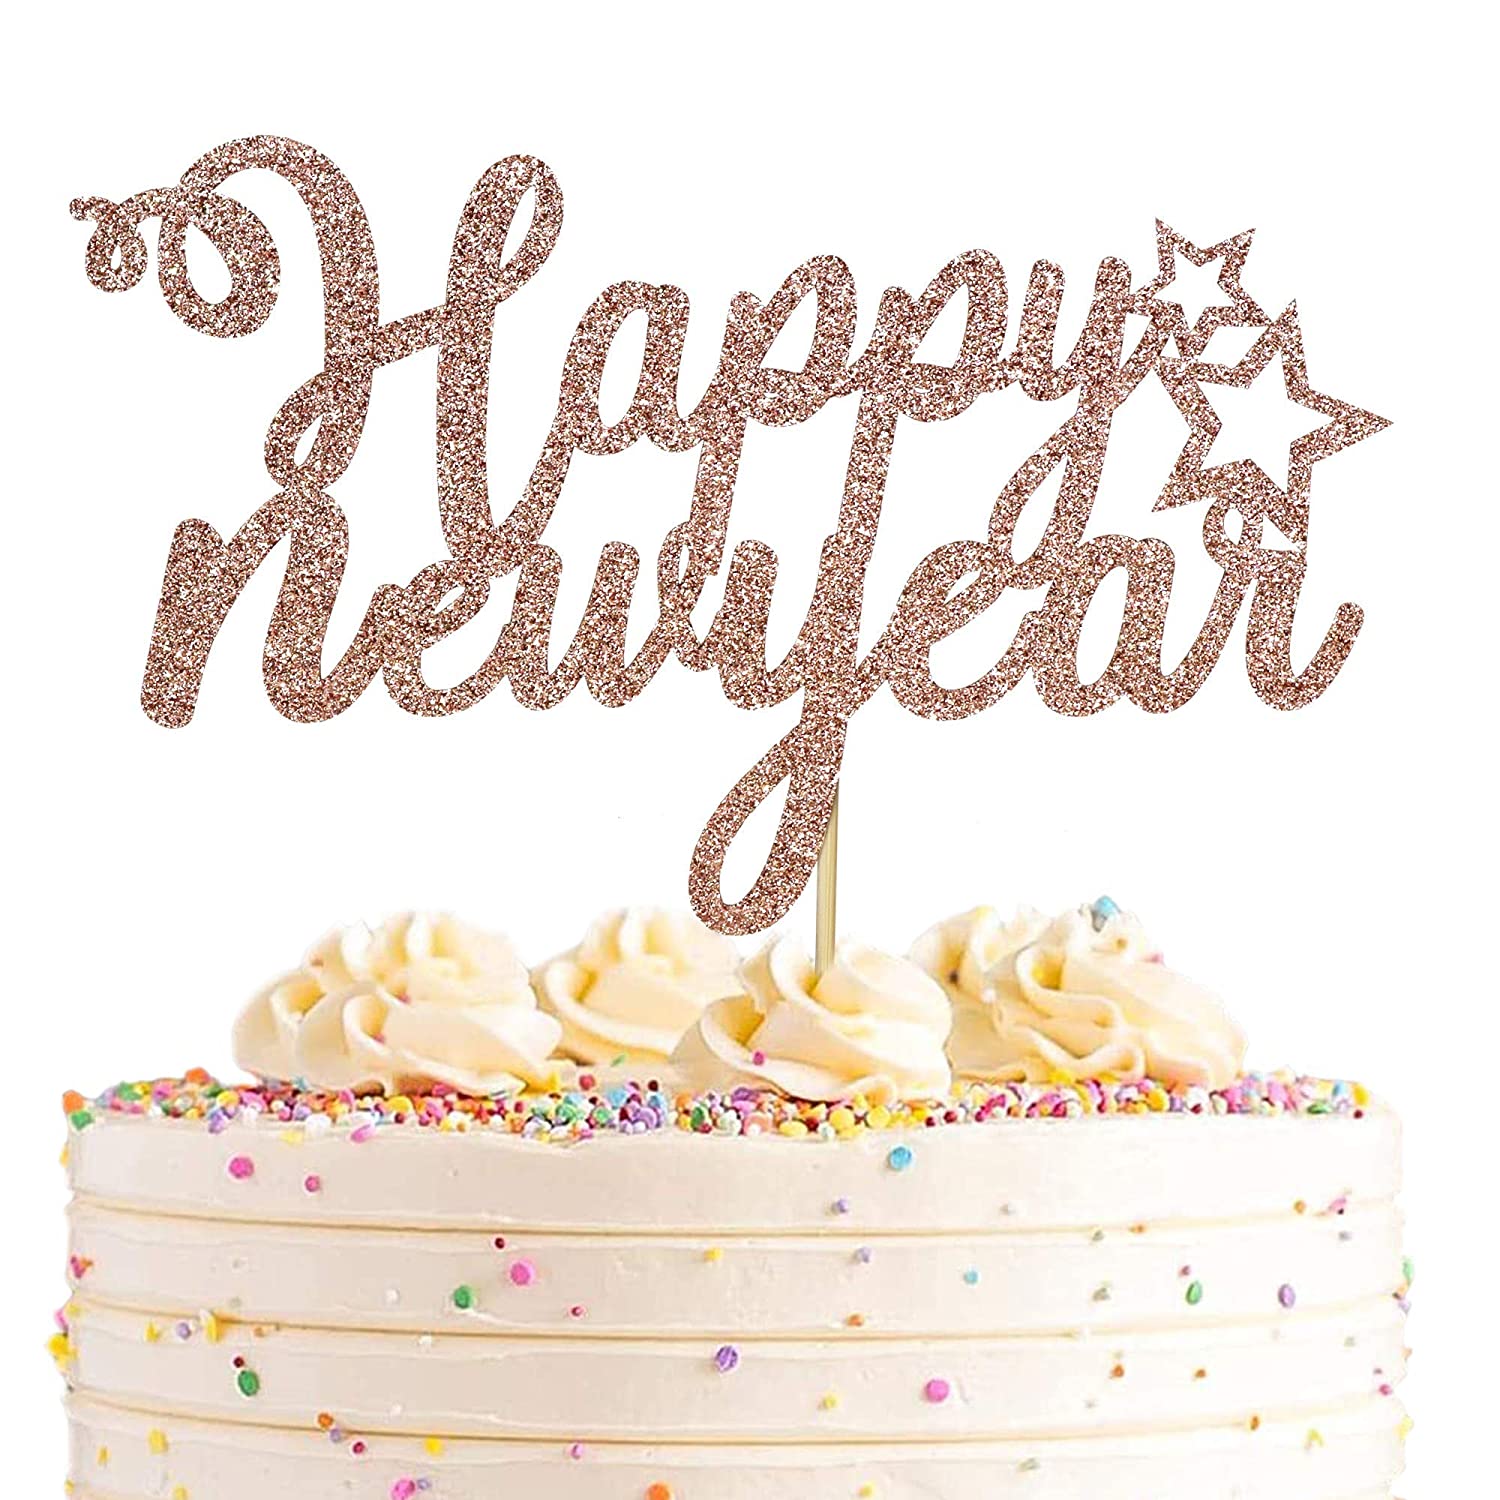 Happy New Year Cake Online Delivery In Delhi, Noida, Ghaziabd – The Cake  King